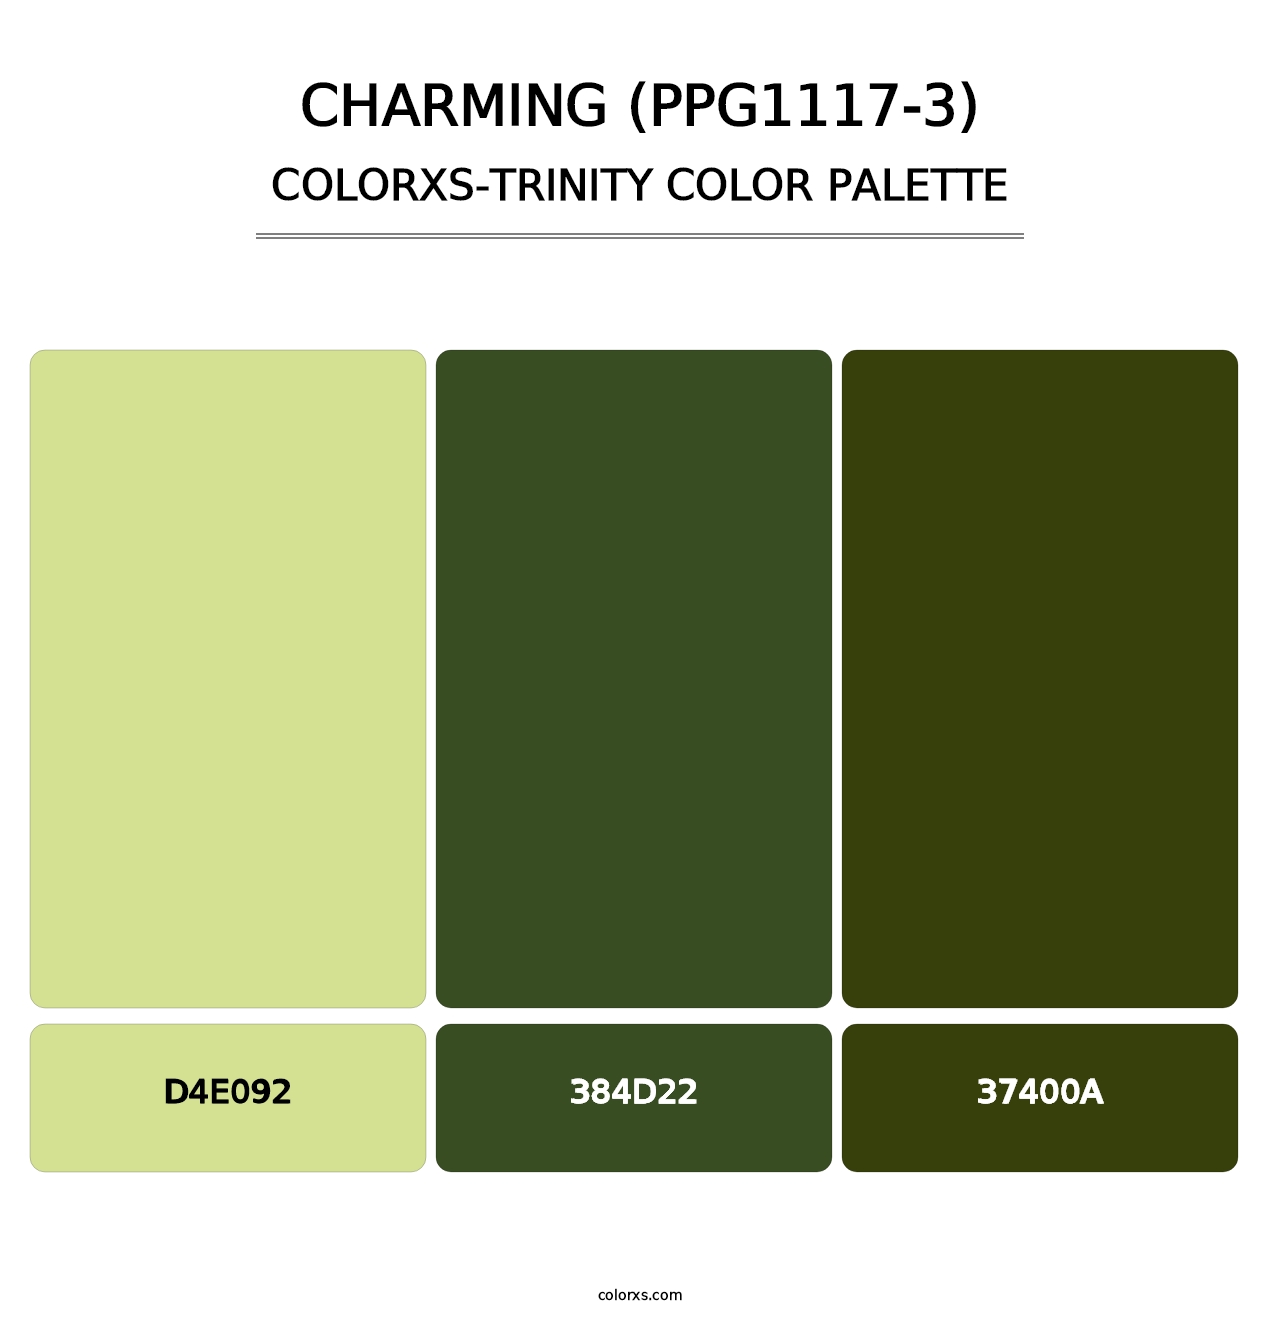 Charming (PPG1117-3) - Colorxs Trinity Palette